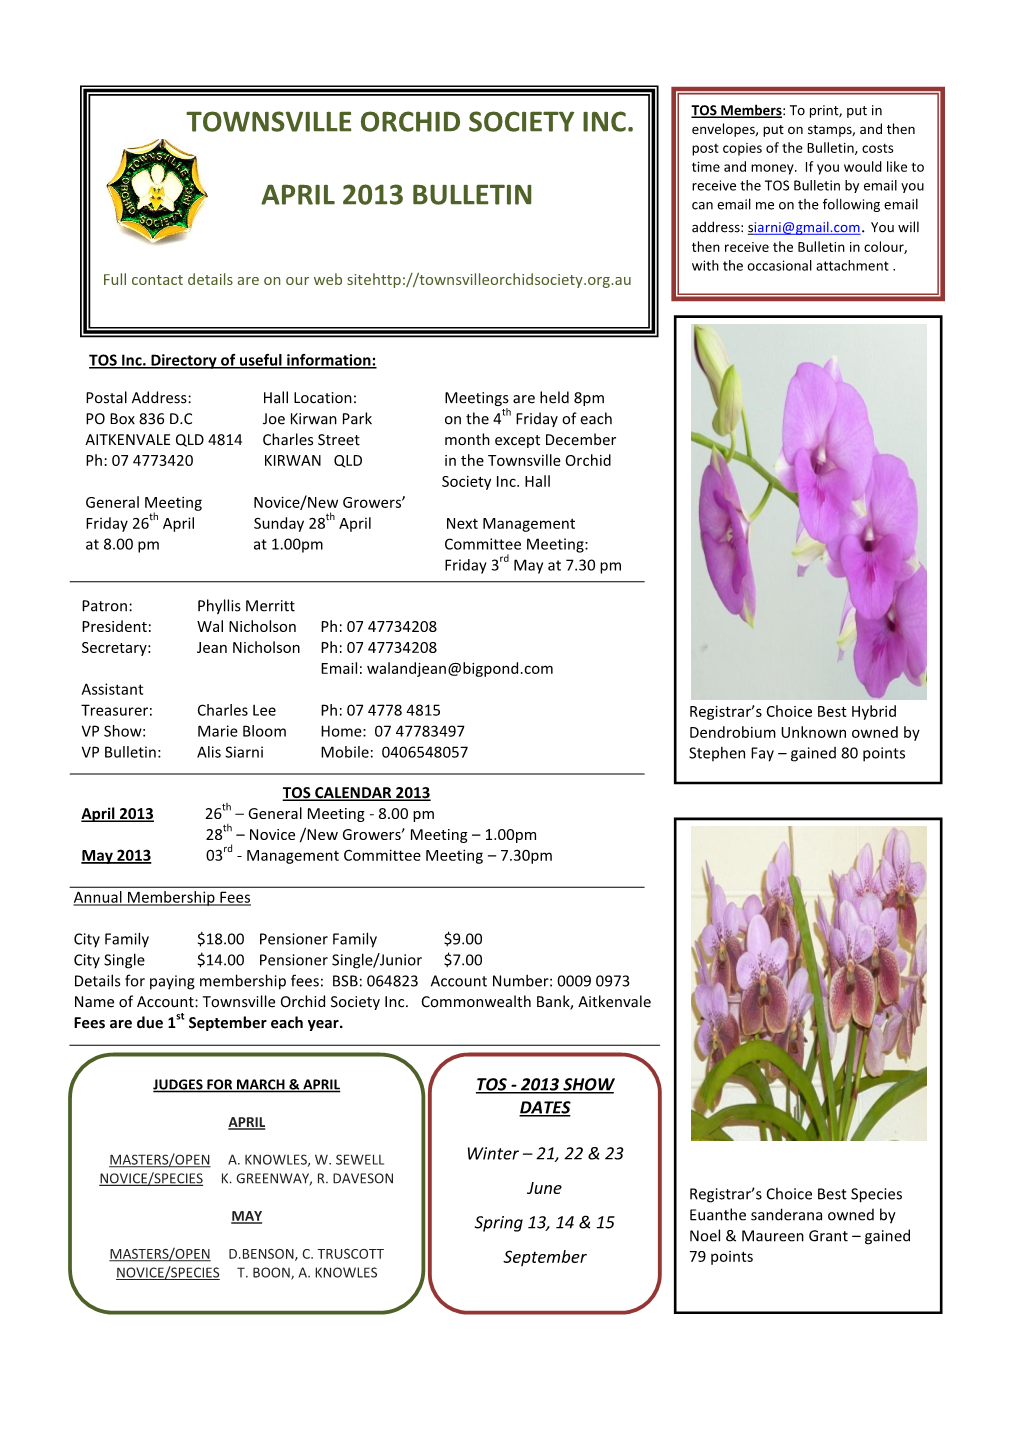 Townsville Orchid Society Inc. April 2013 Bulletin